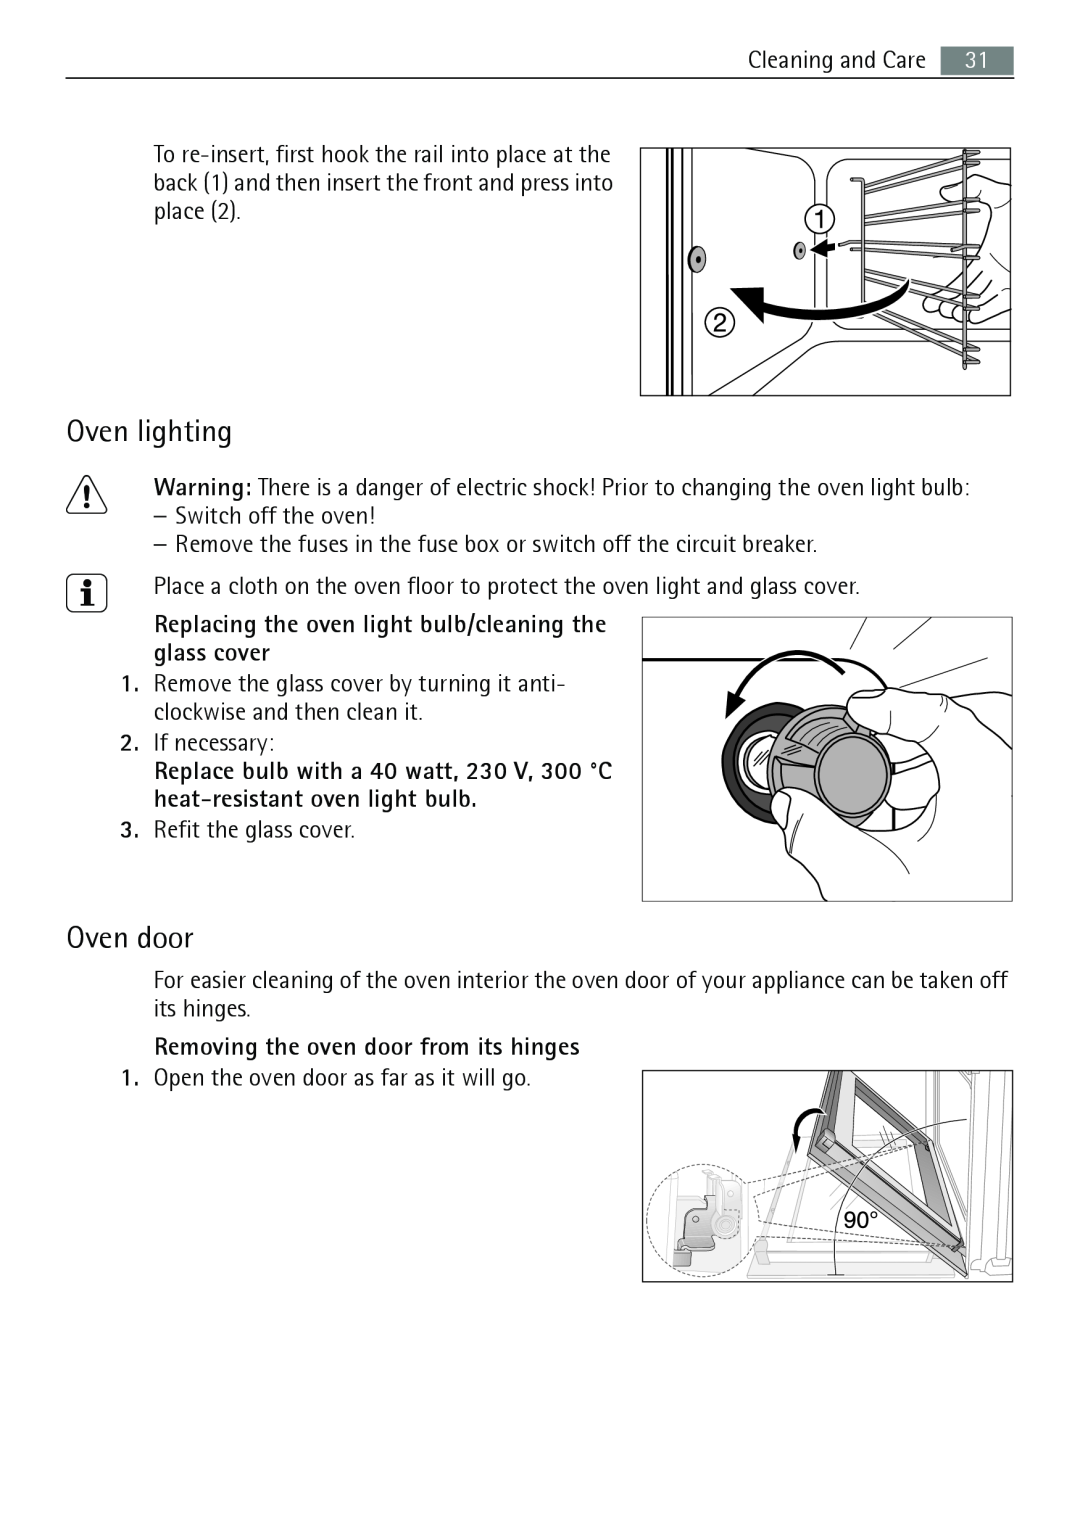 Electrolux B3741-5 user manual Oven lighting, Oven door, Replacing the oven light bulb/cleaning the glass cover 